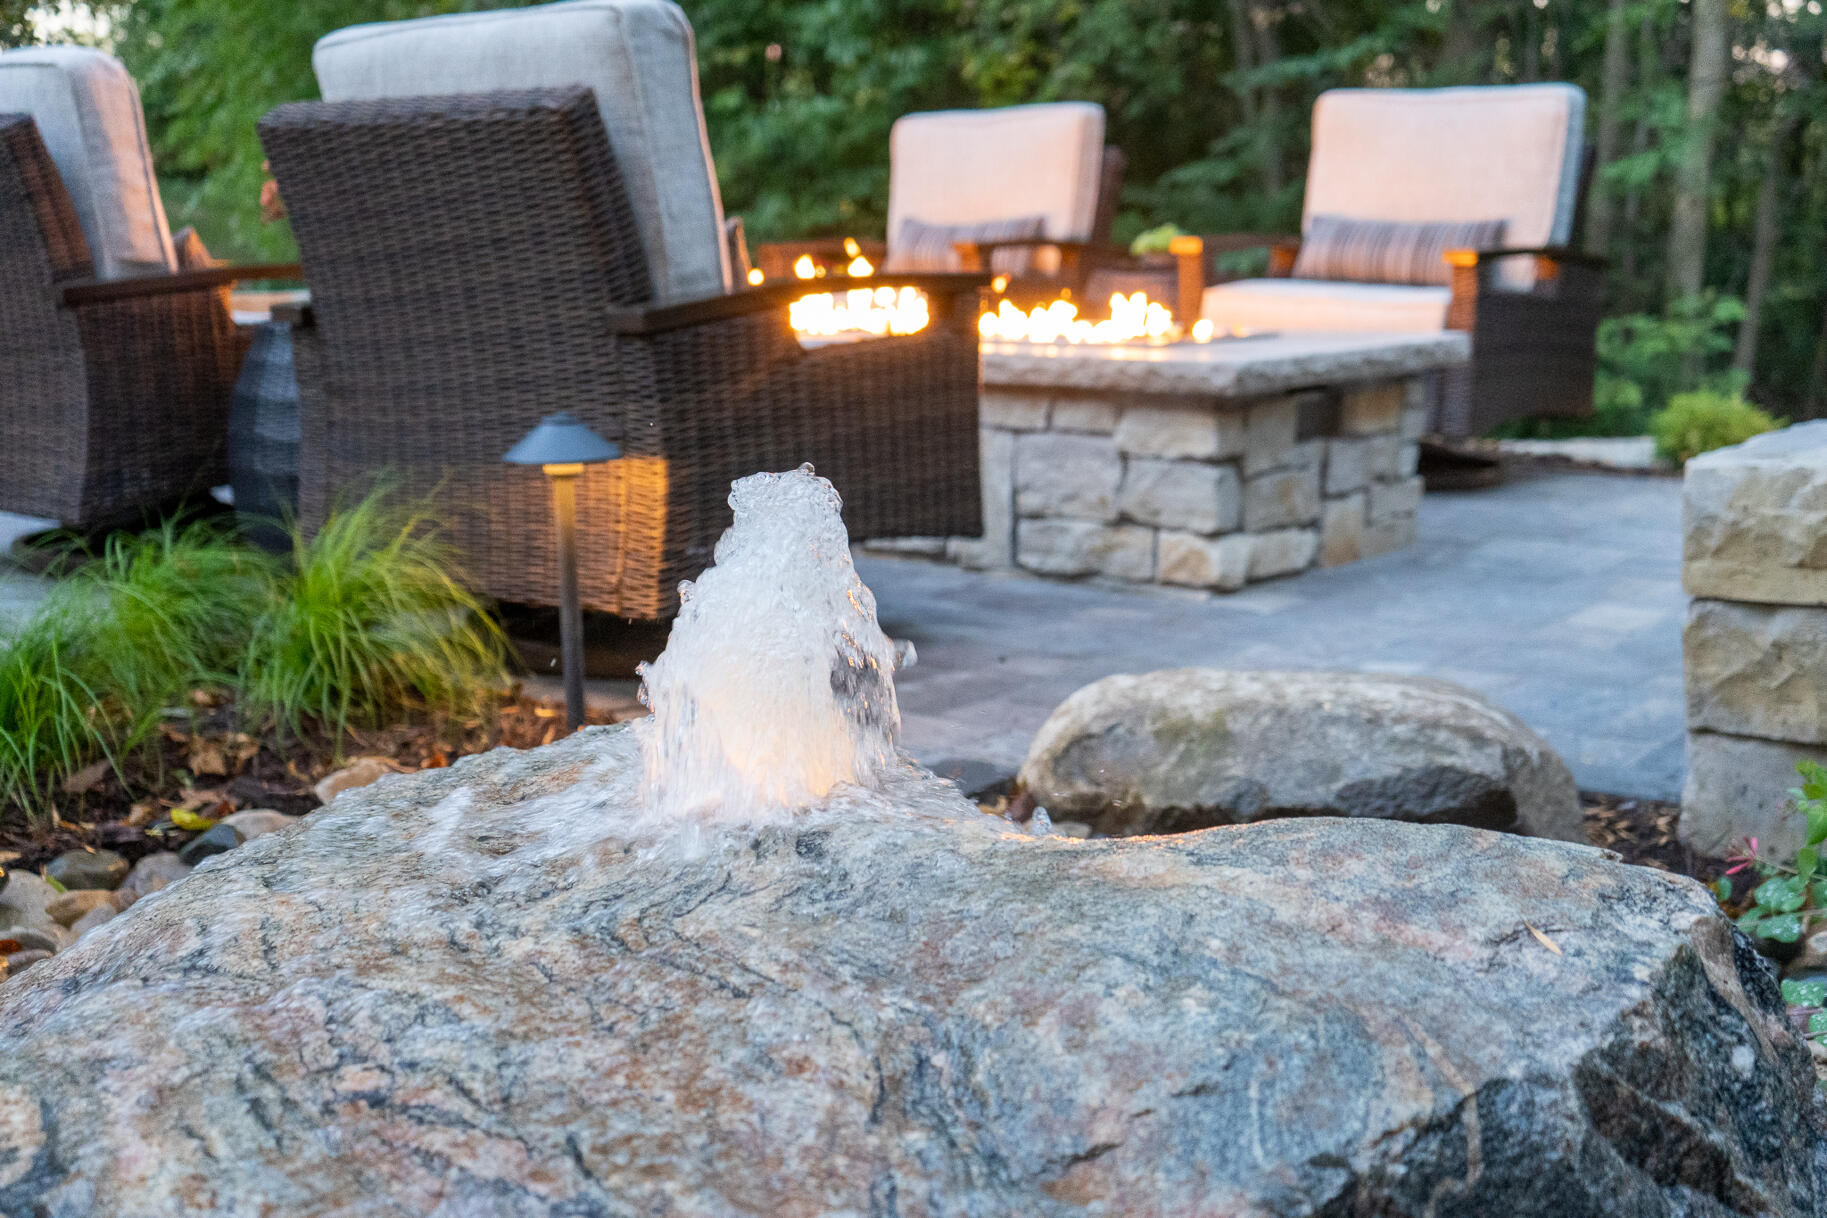 Outdoor paver patio with seating, oblong fire ring and waterfall feature